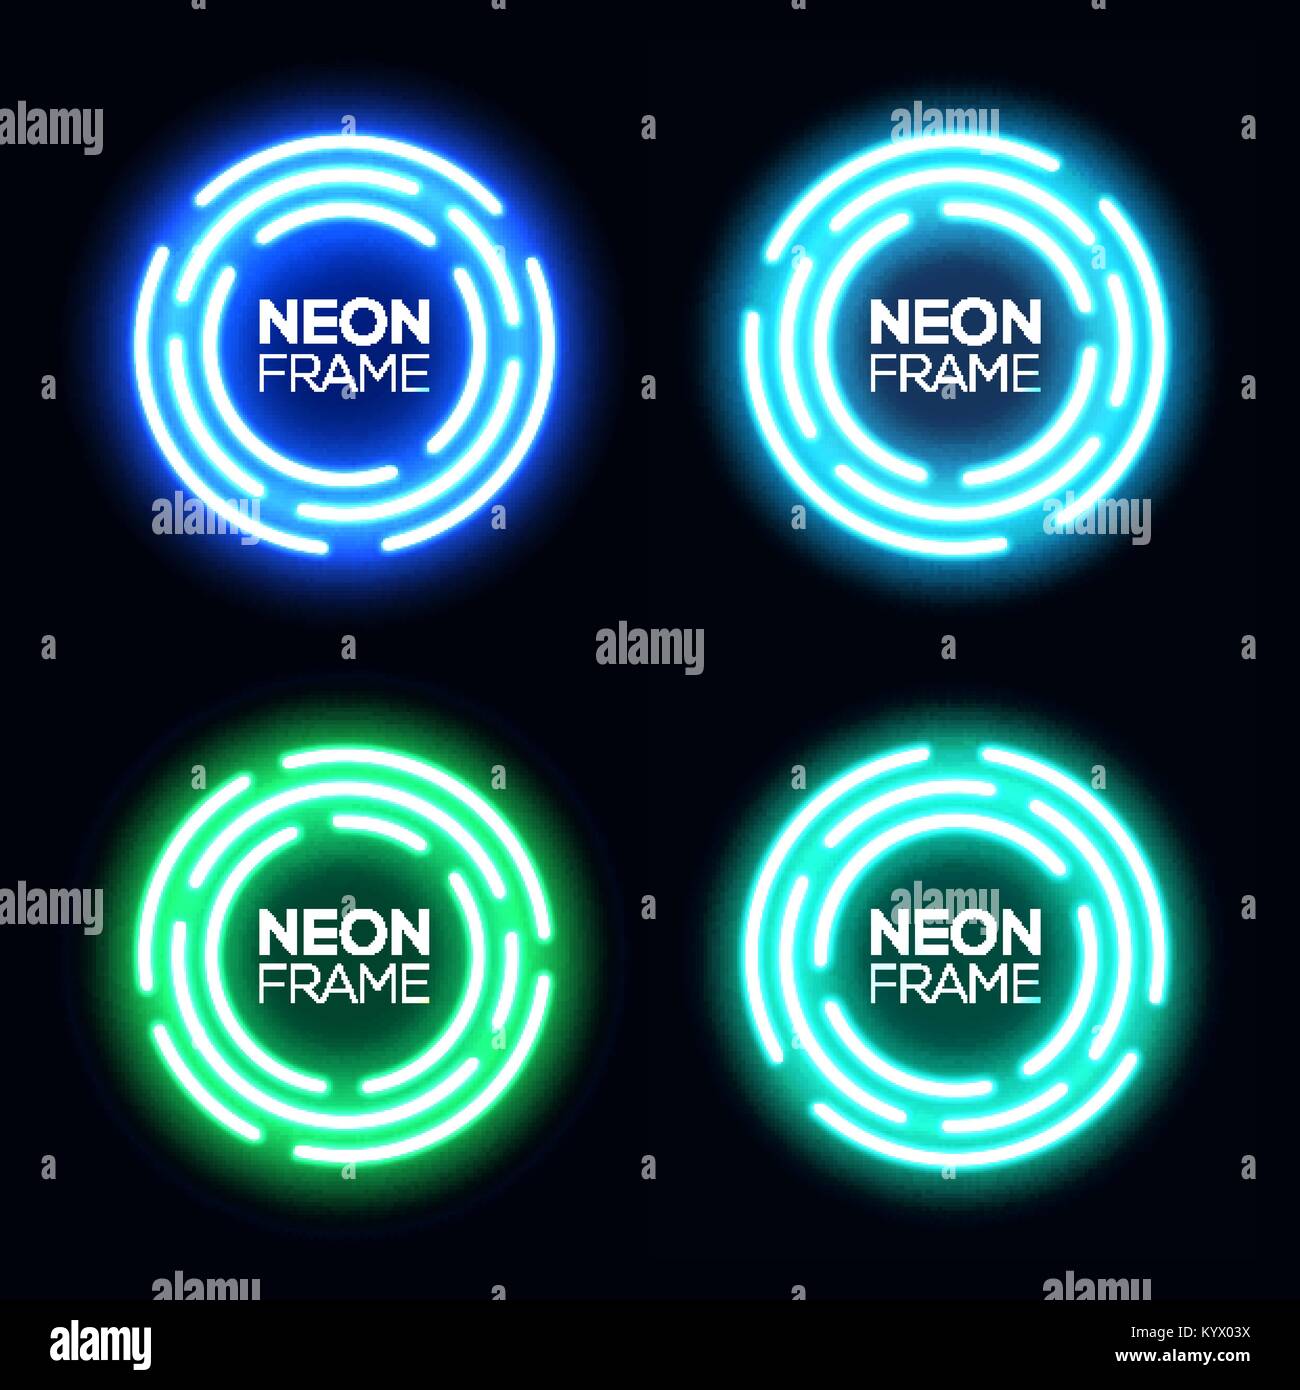 Neon light circles set. Shining round techno frames collection. Night club electric 3d banners on dark backdrop. Blue and green neon abstract background with glow. Technology vector illustration. Stock Vector